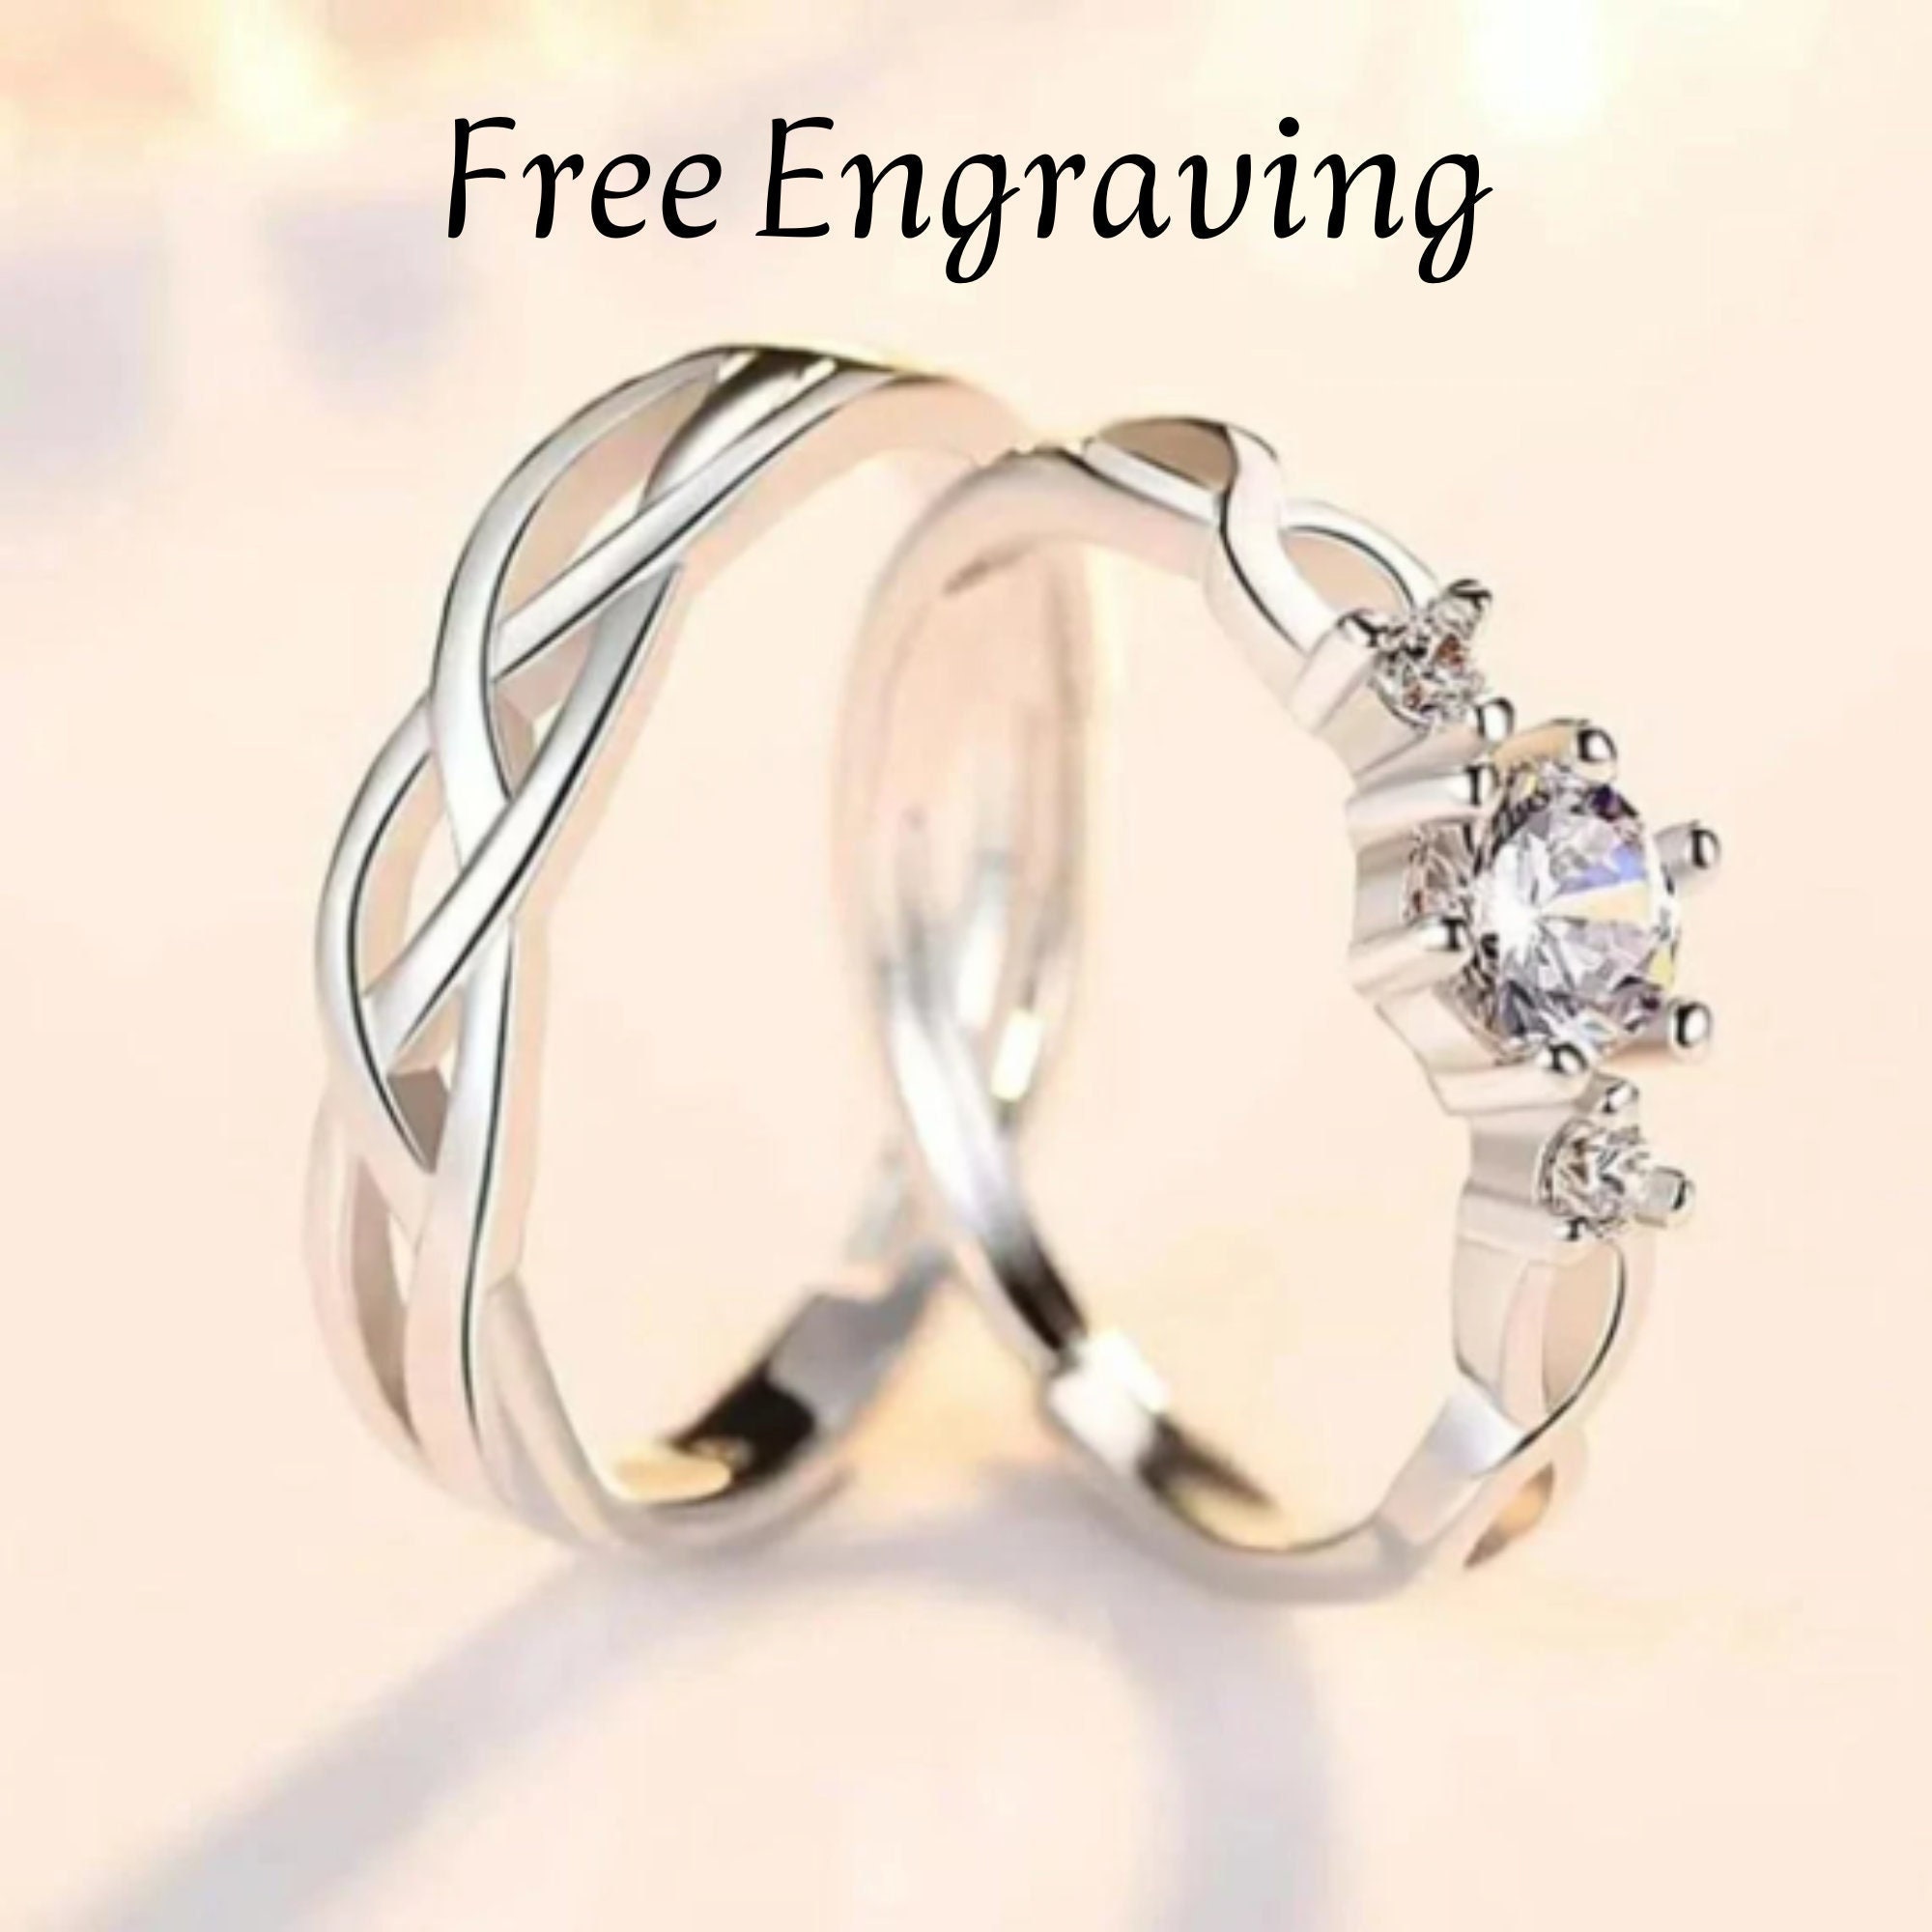 925 Silver Couple Promise Ring Set Adjustable Sterling Silver - Etsy